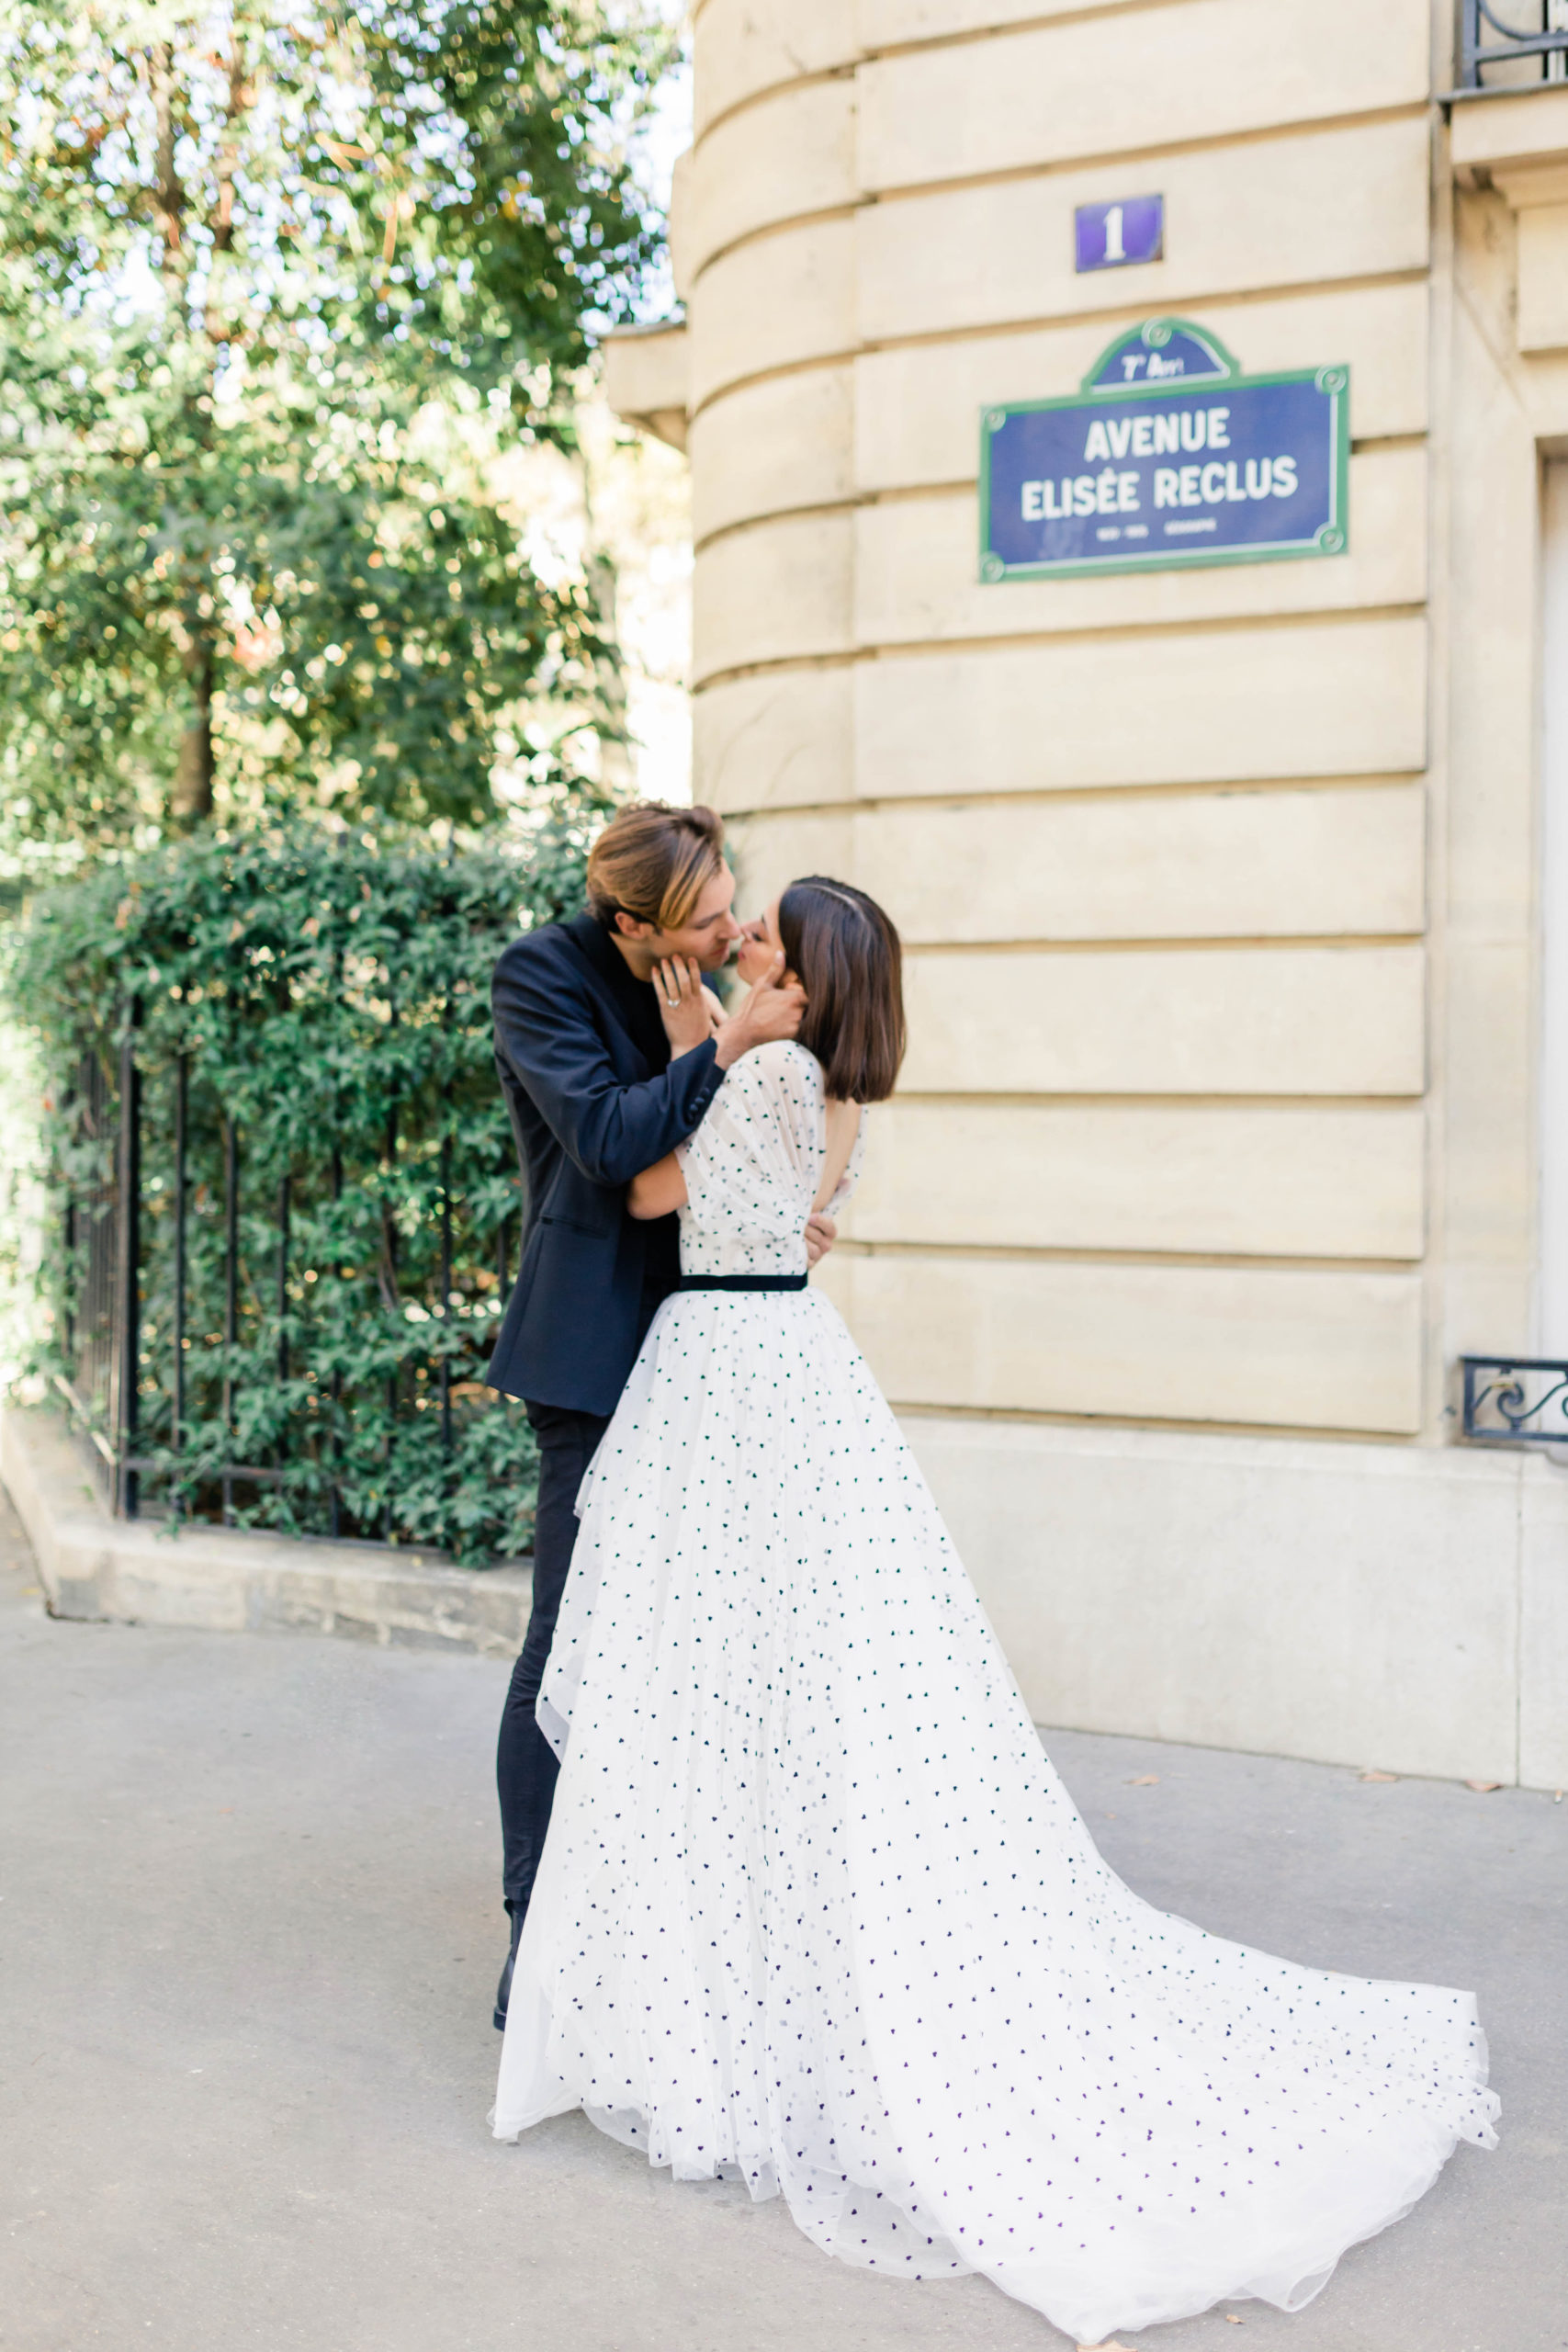 Paris France destination engagement session with man leaning in and kissing a brunette girl as they stand on the side walk together